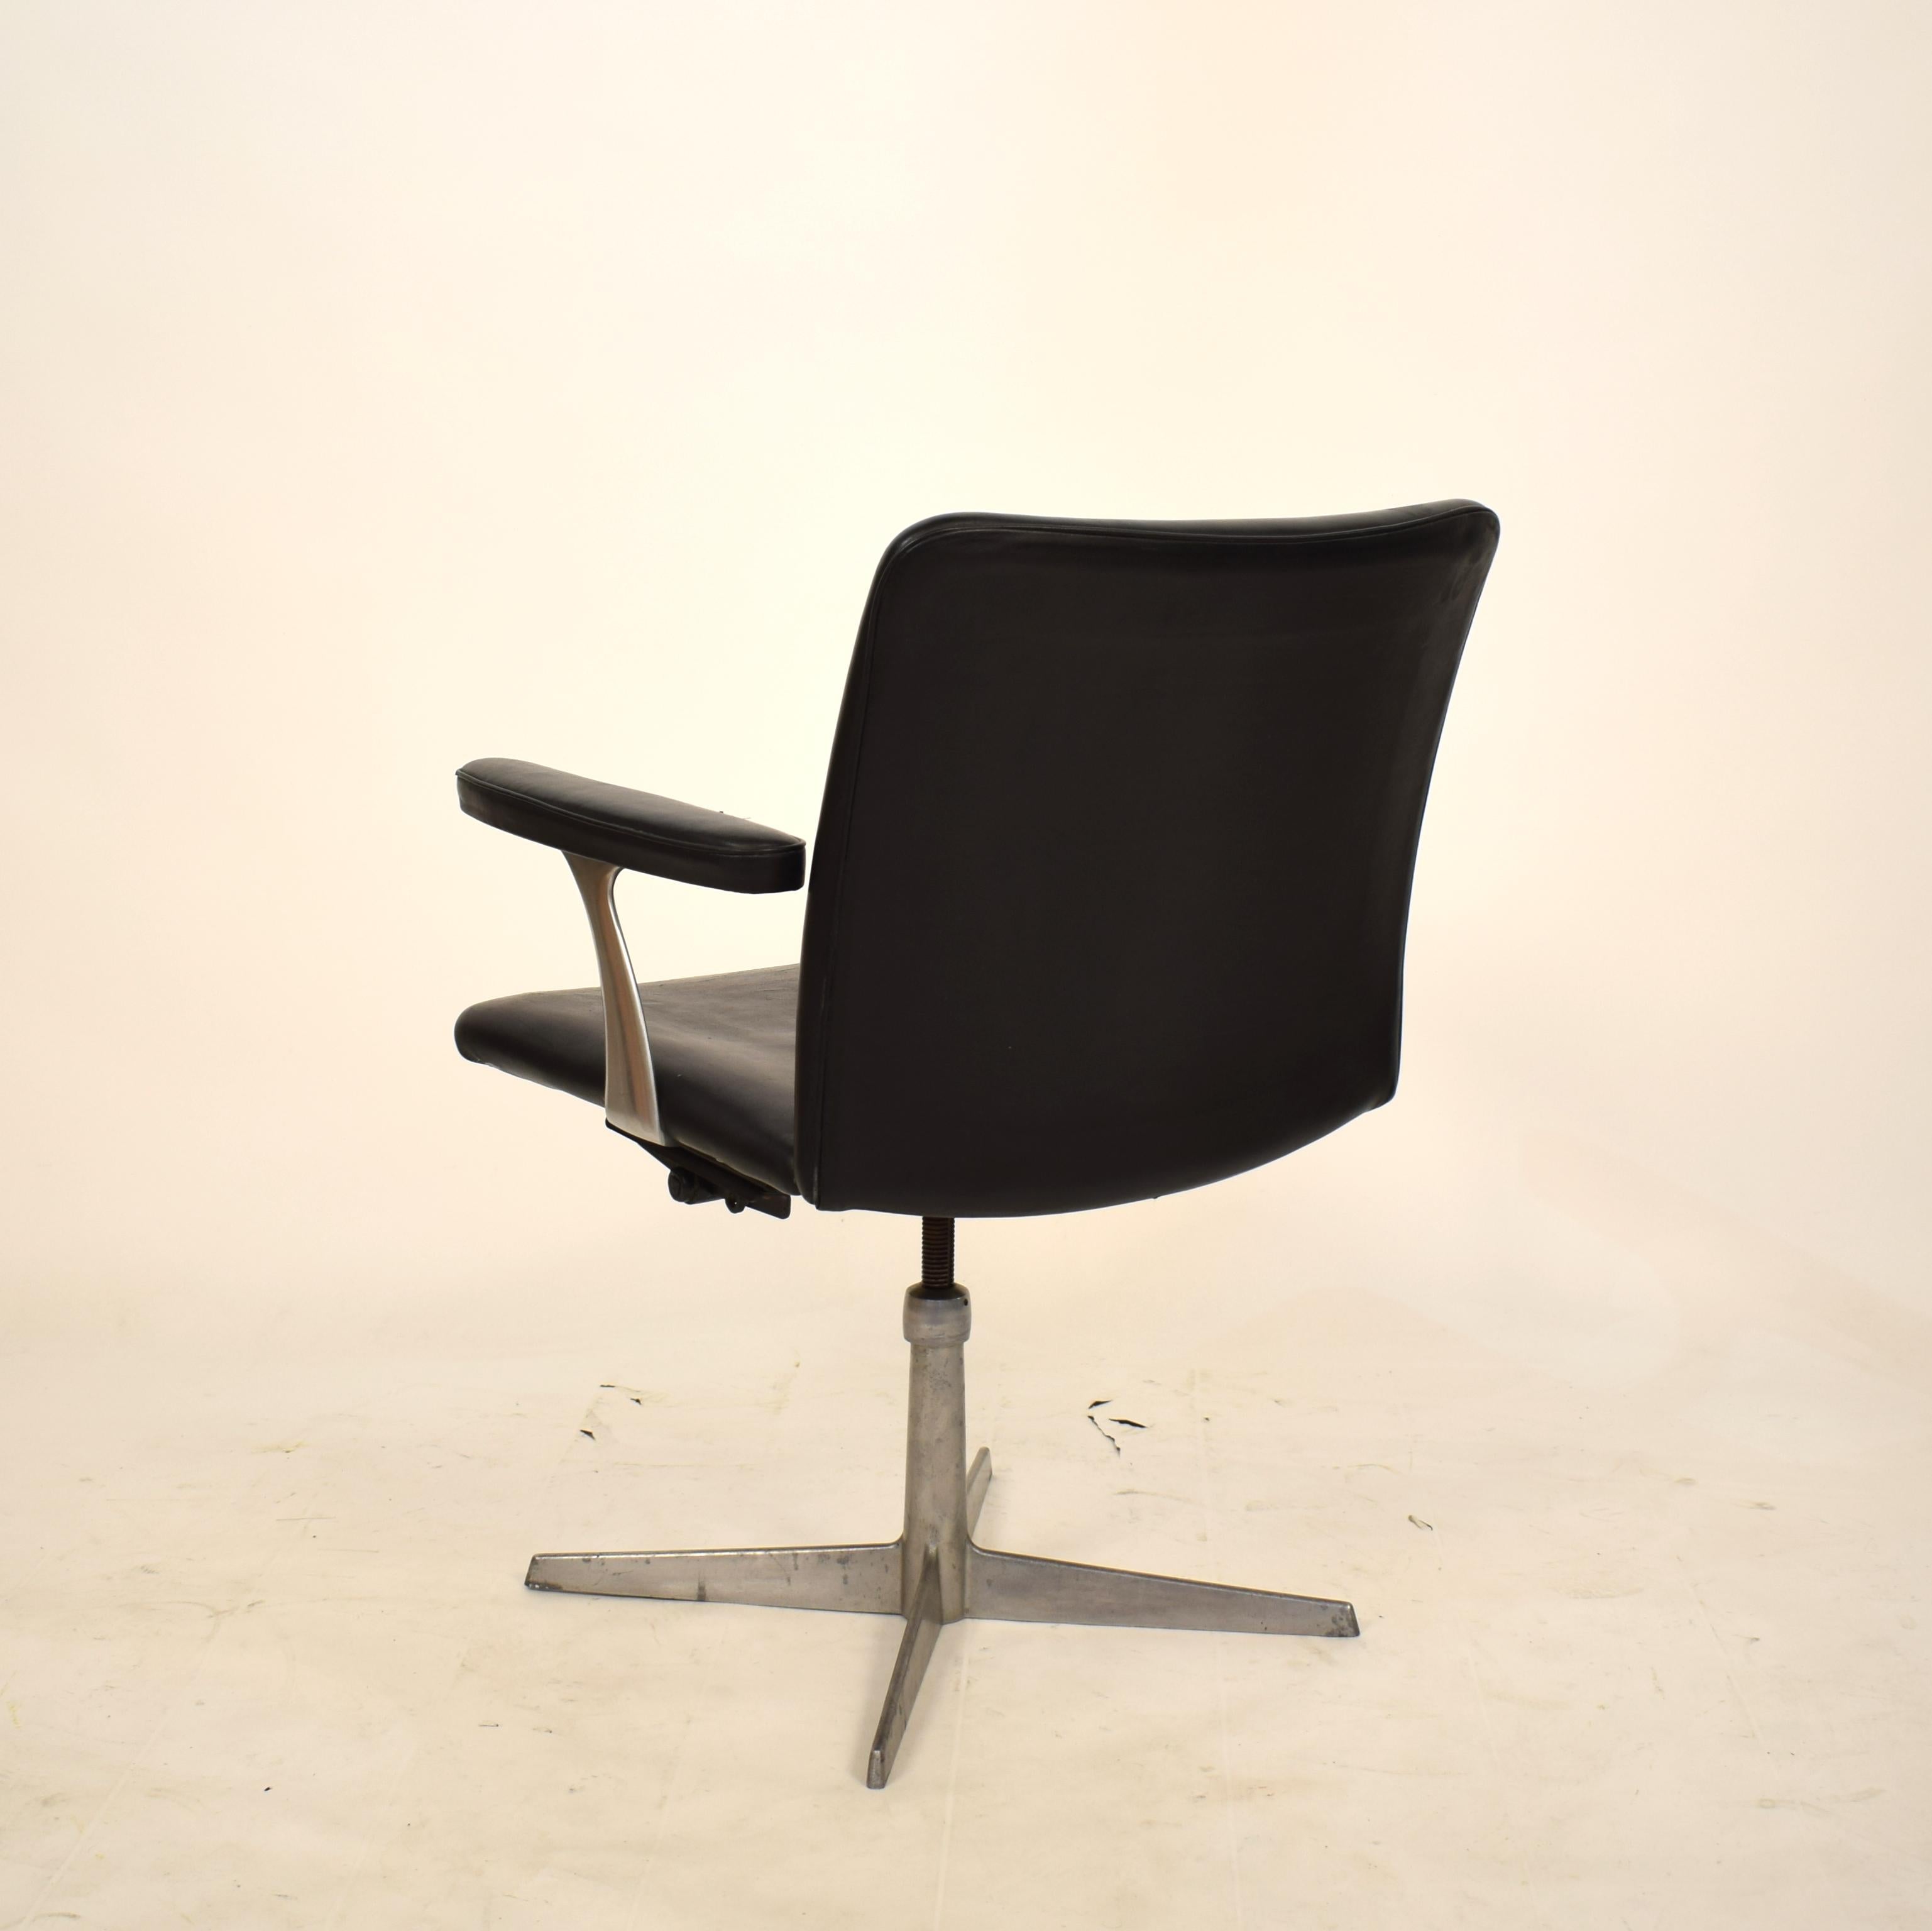 Midcentury Scandinavian Armchair in Black Leather and Aluminum, circa 1970 For Sale 2